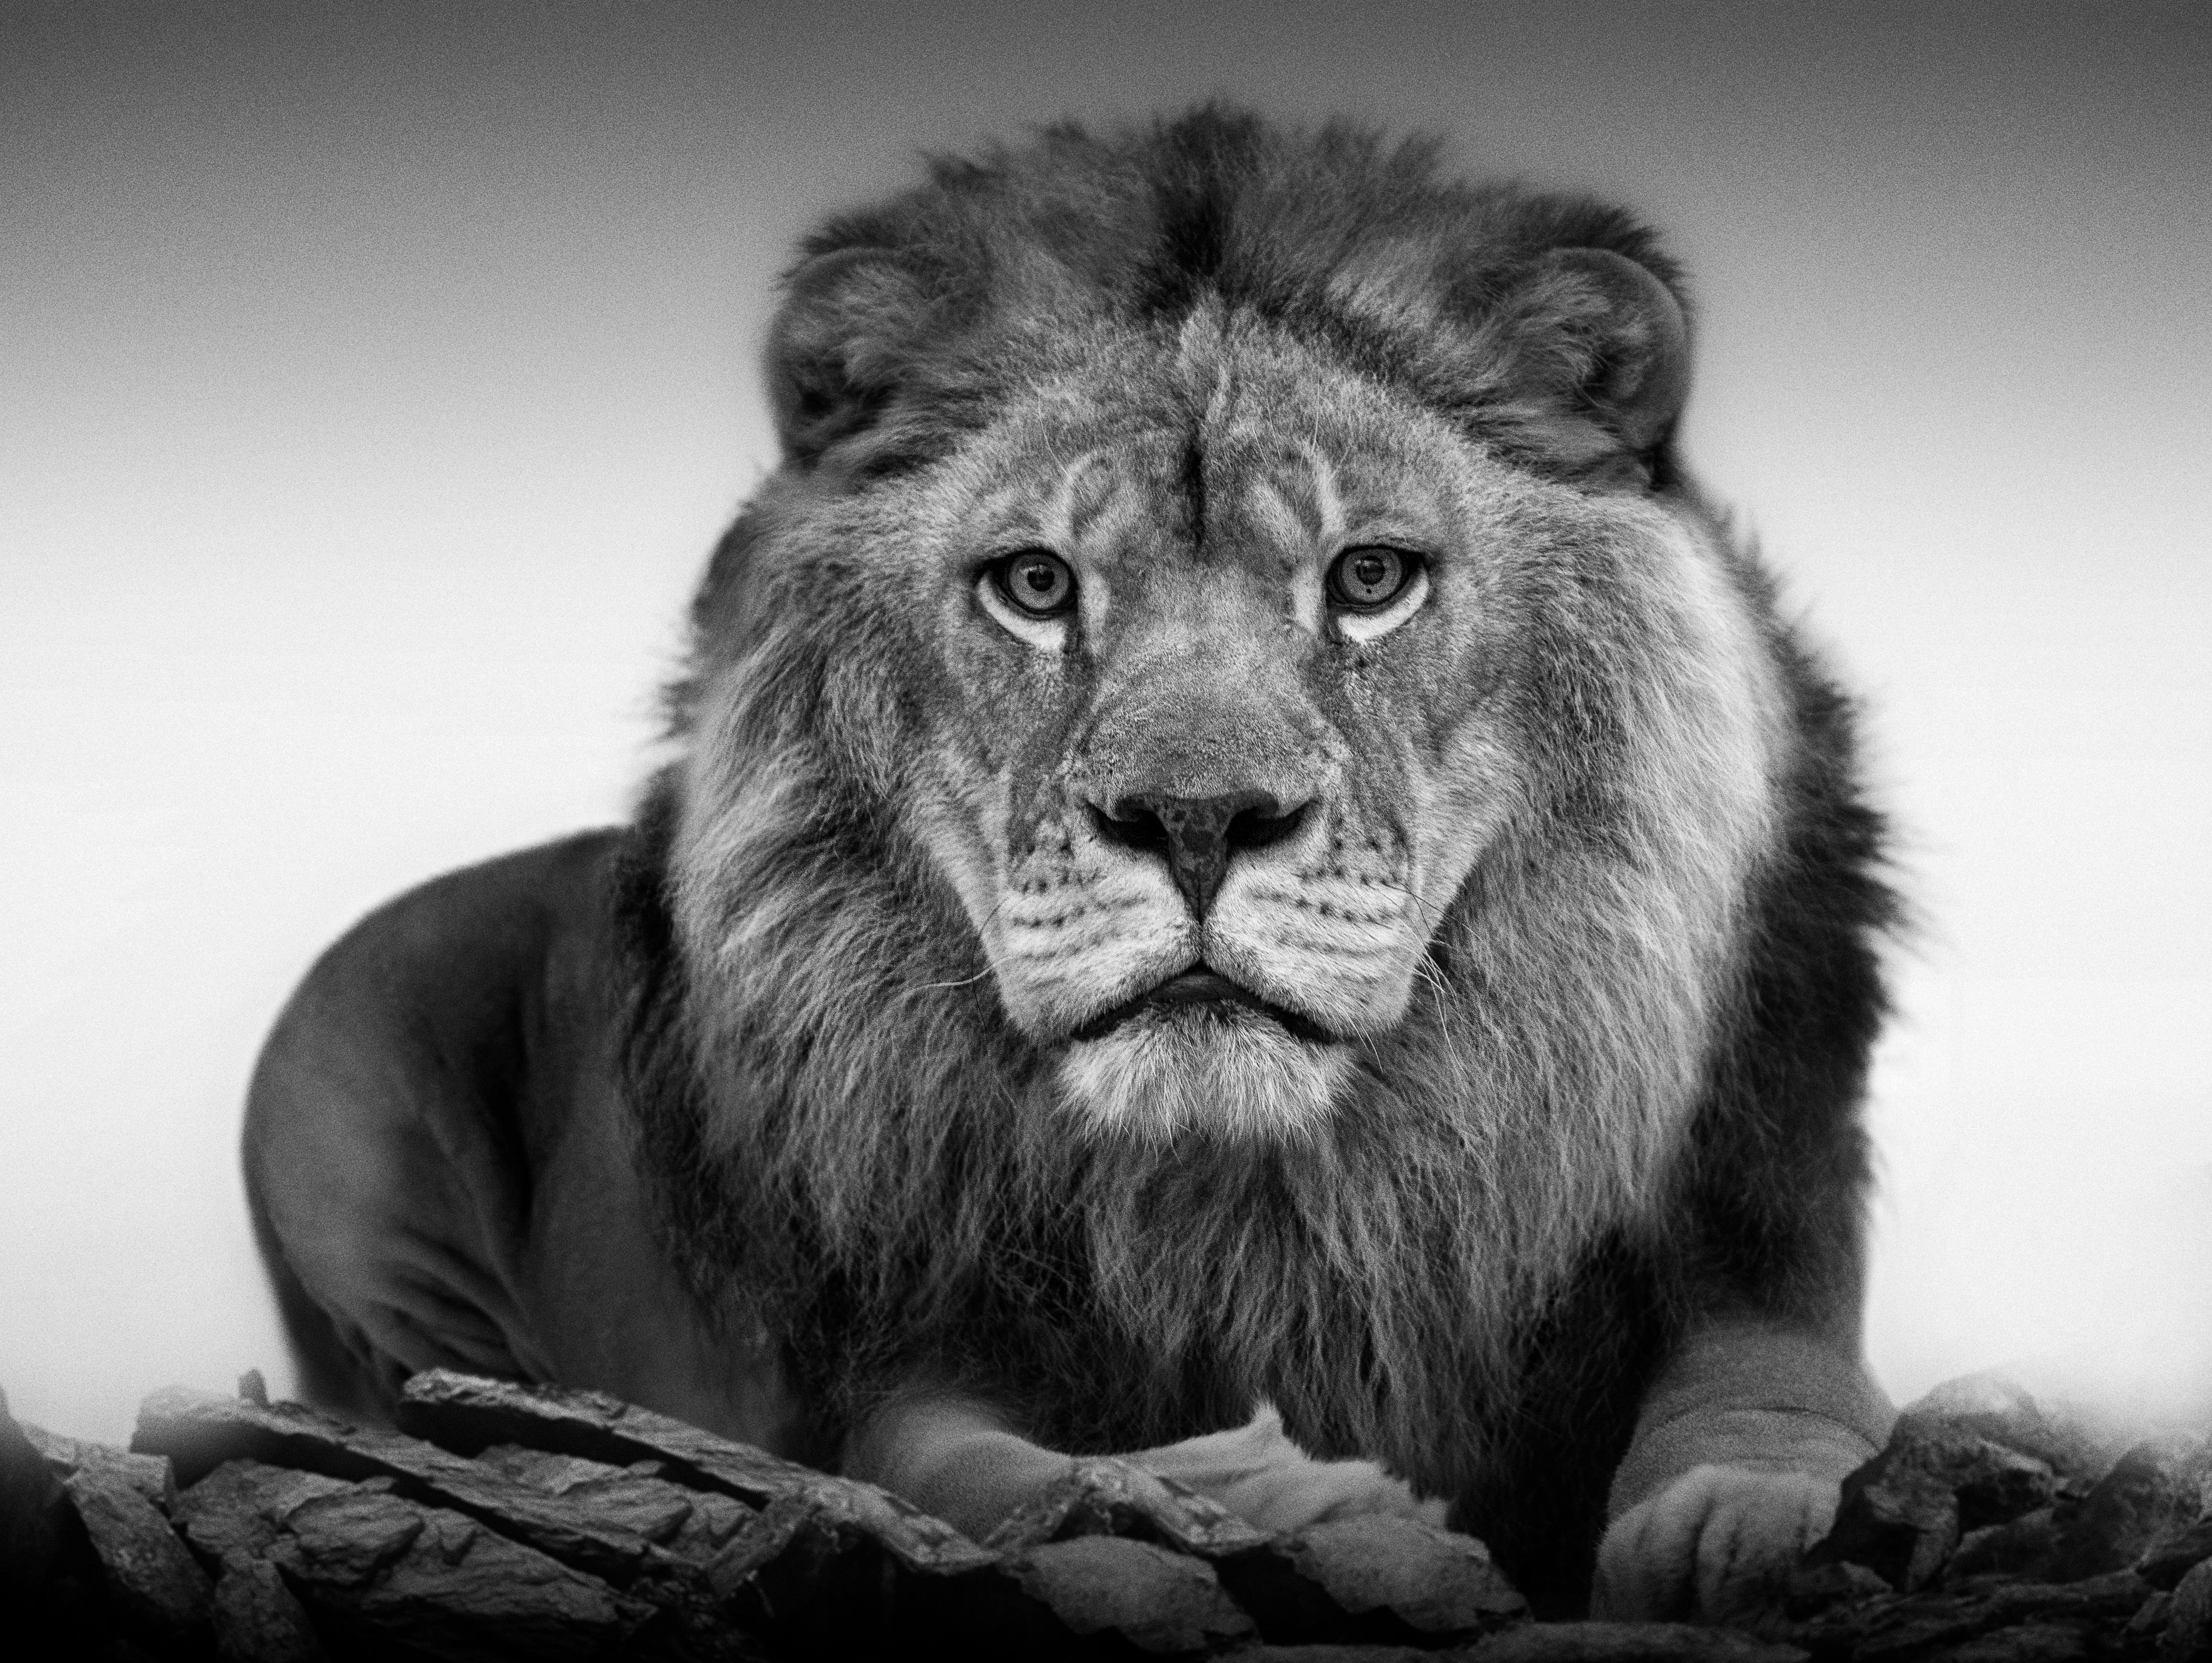 Shane Russeck Black and White Photograph - Black and White Lion Photography - 24x36 Lion Portrait, Photograph Signed Art